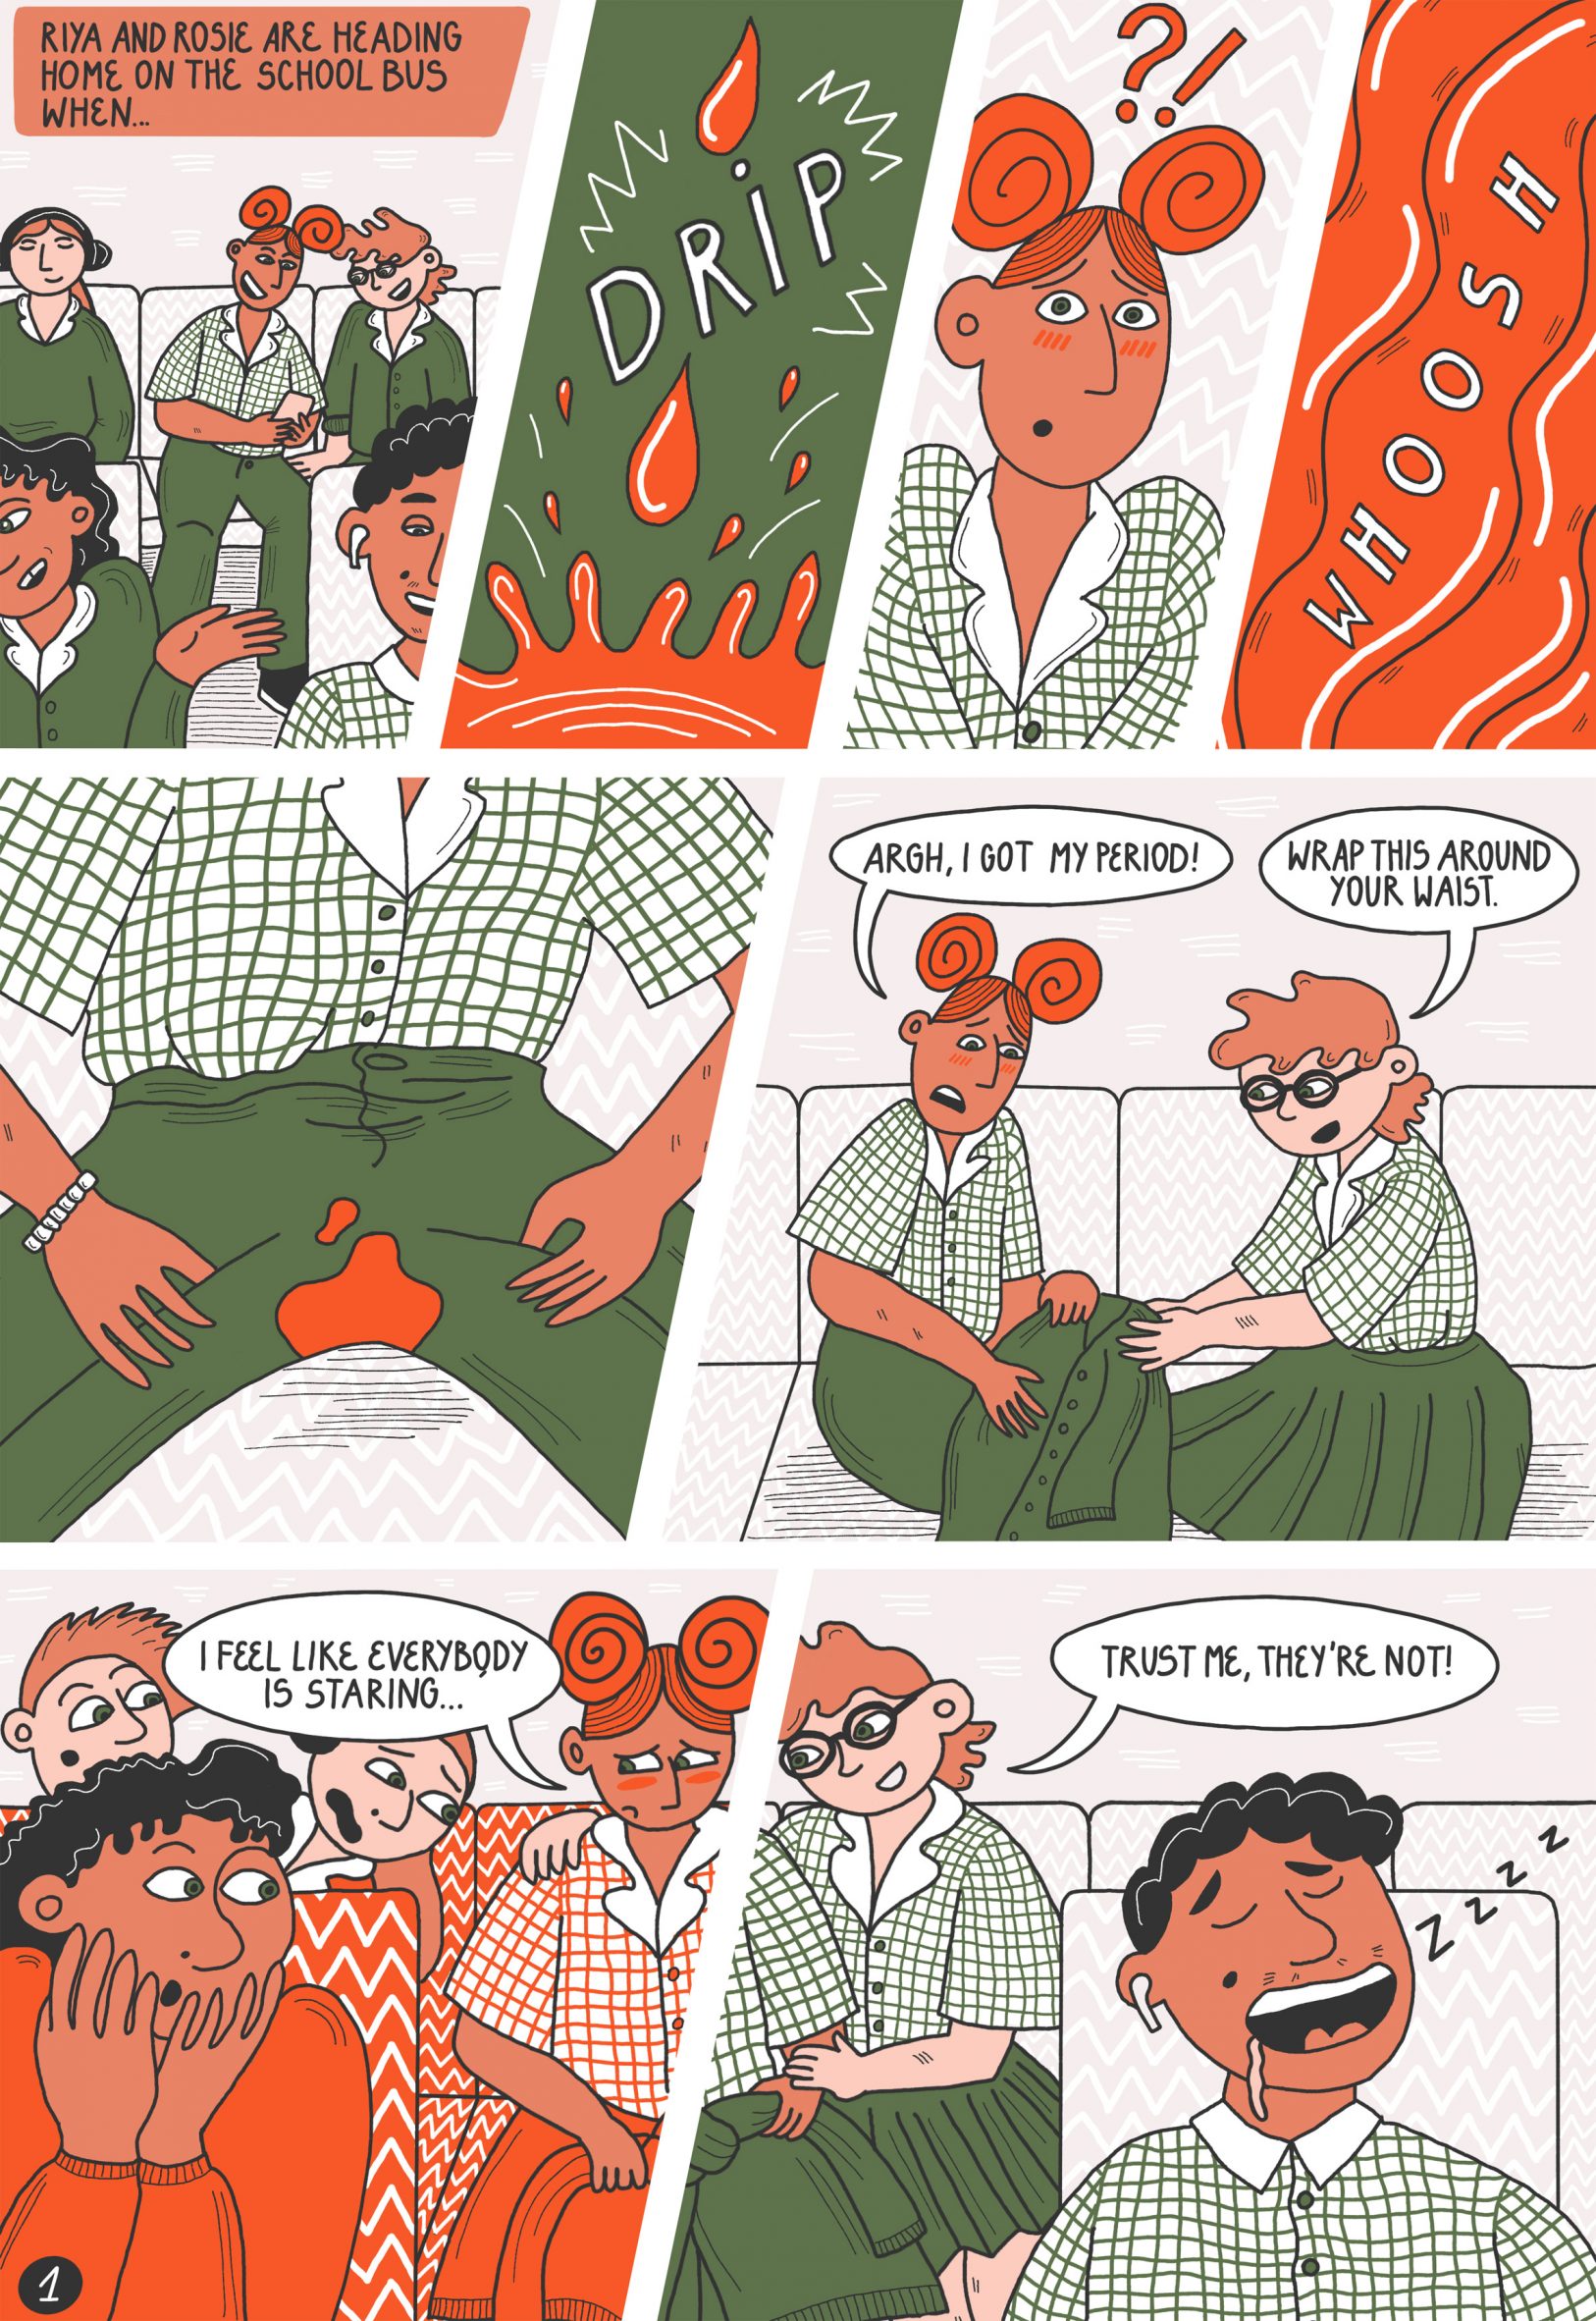 Justyna Green's comic for period pants brand breaks an important